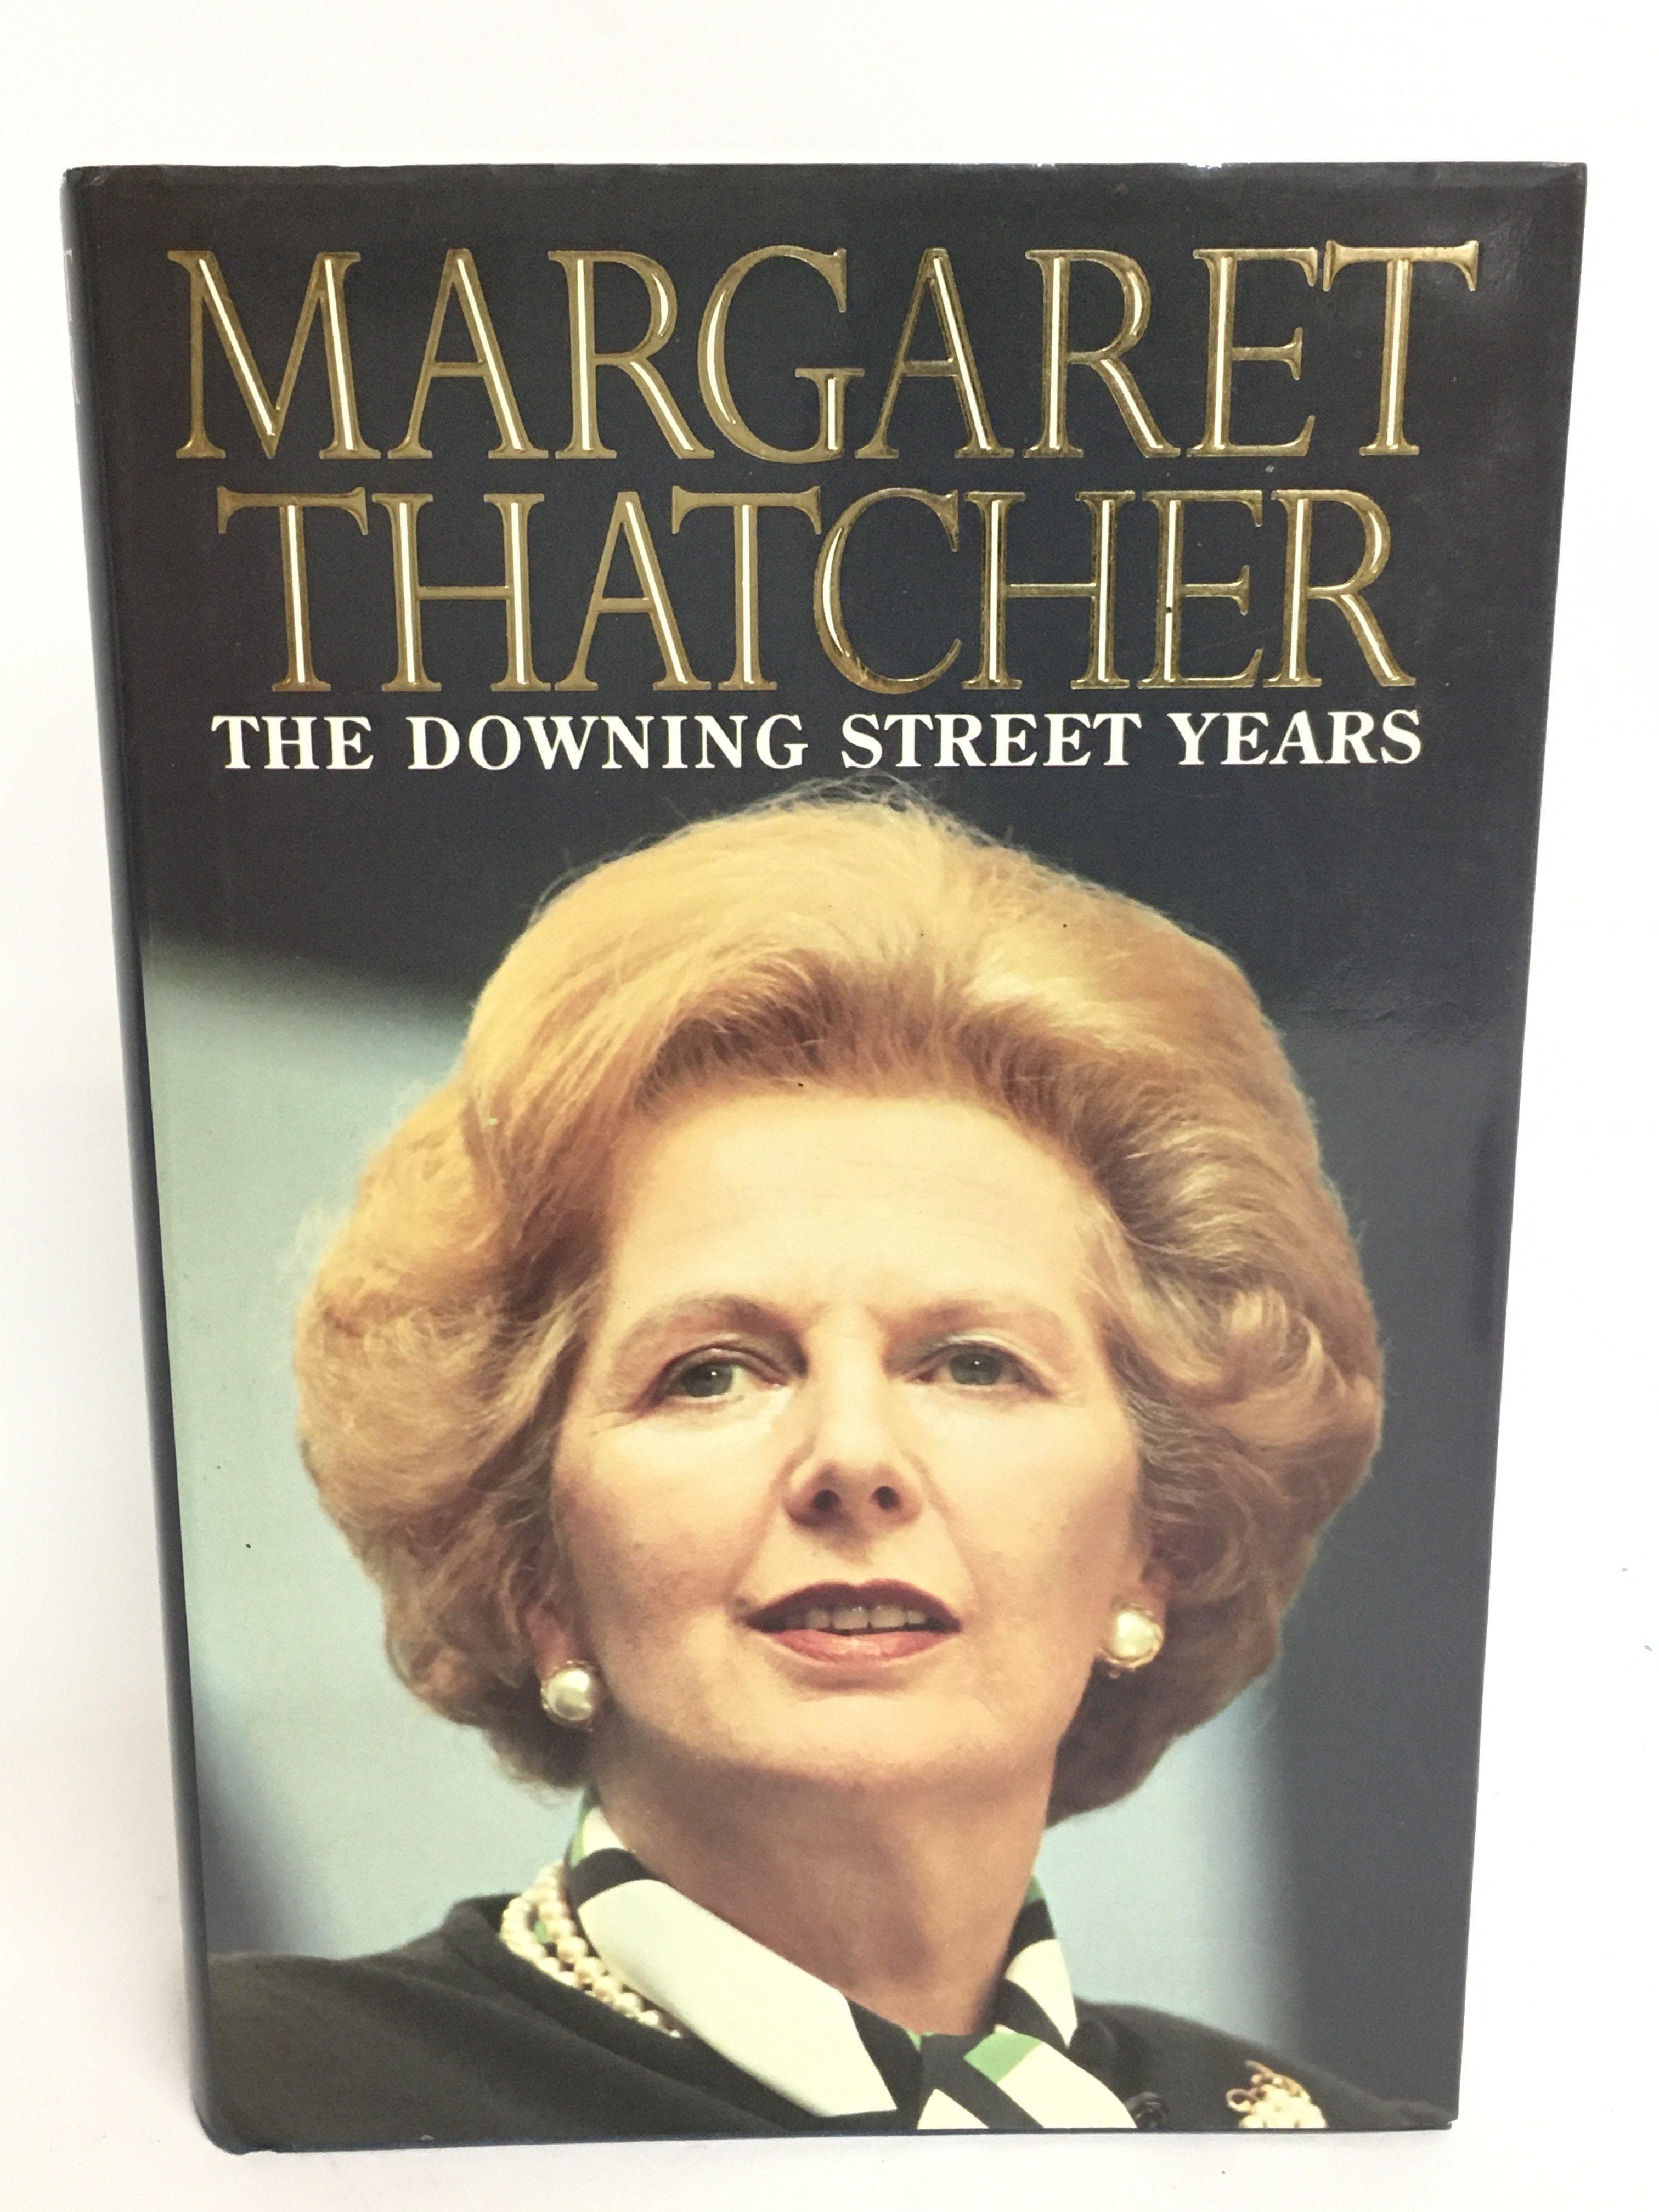 A signed copy of Margaret Thatcher The Downing Str